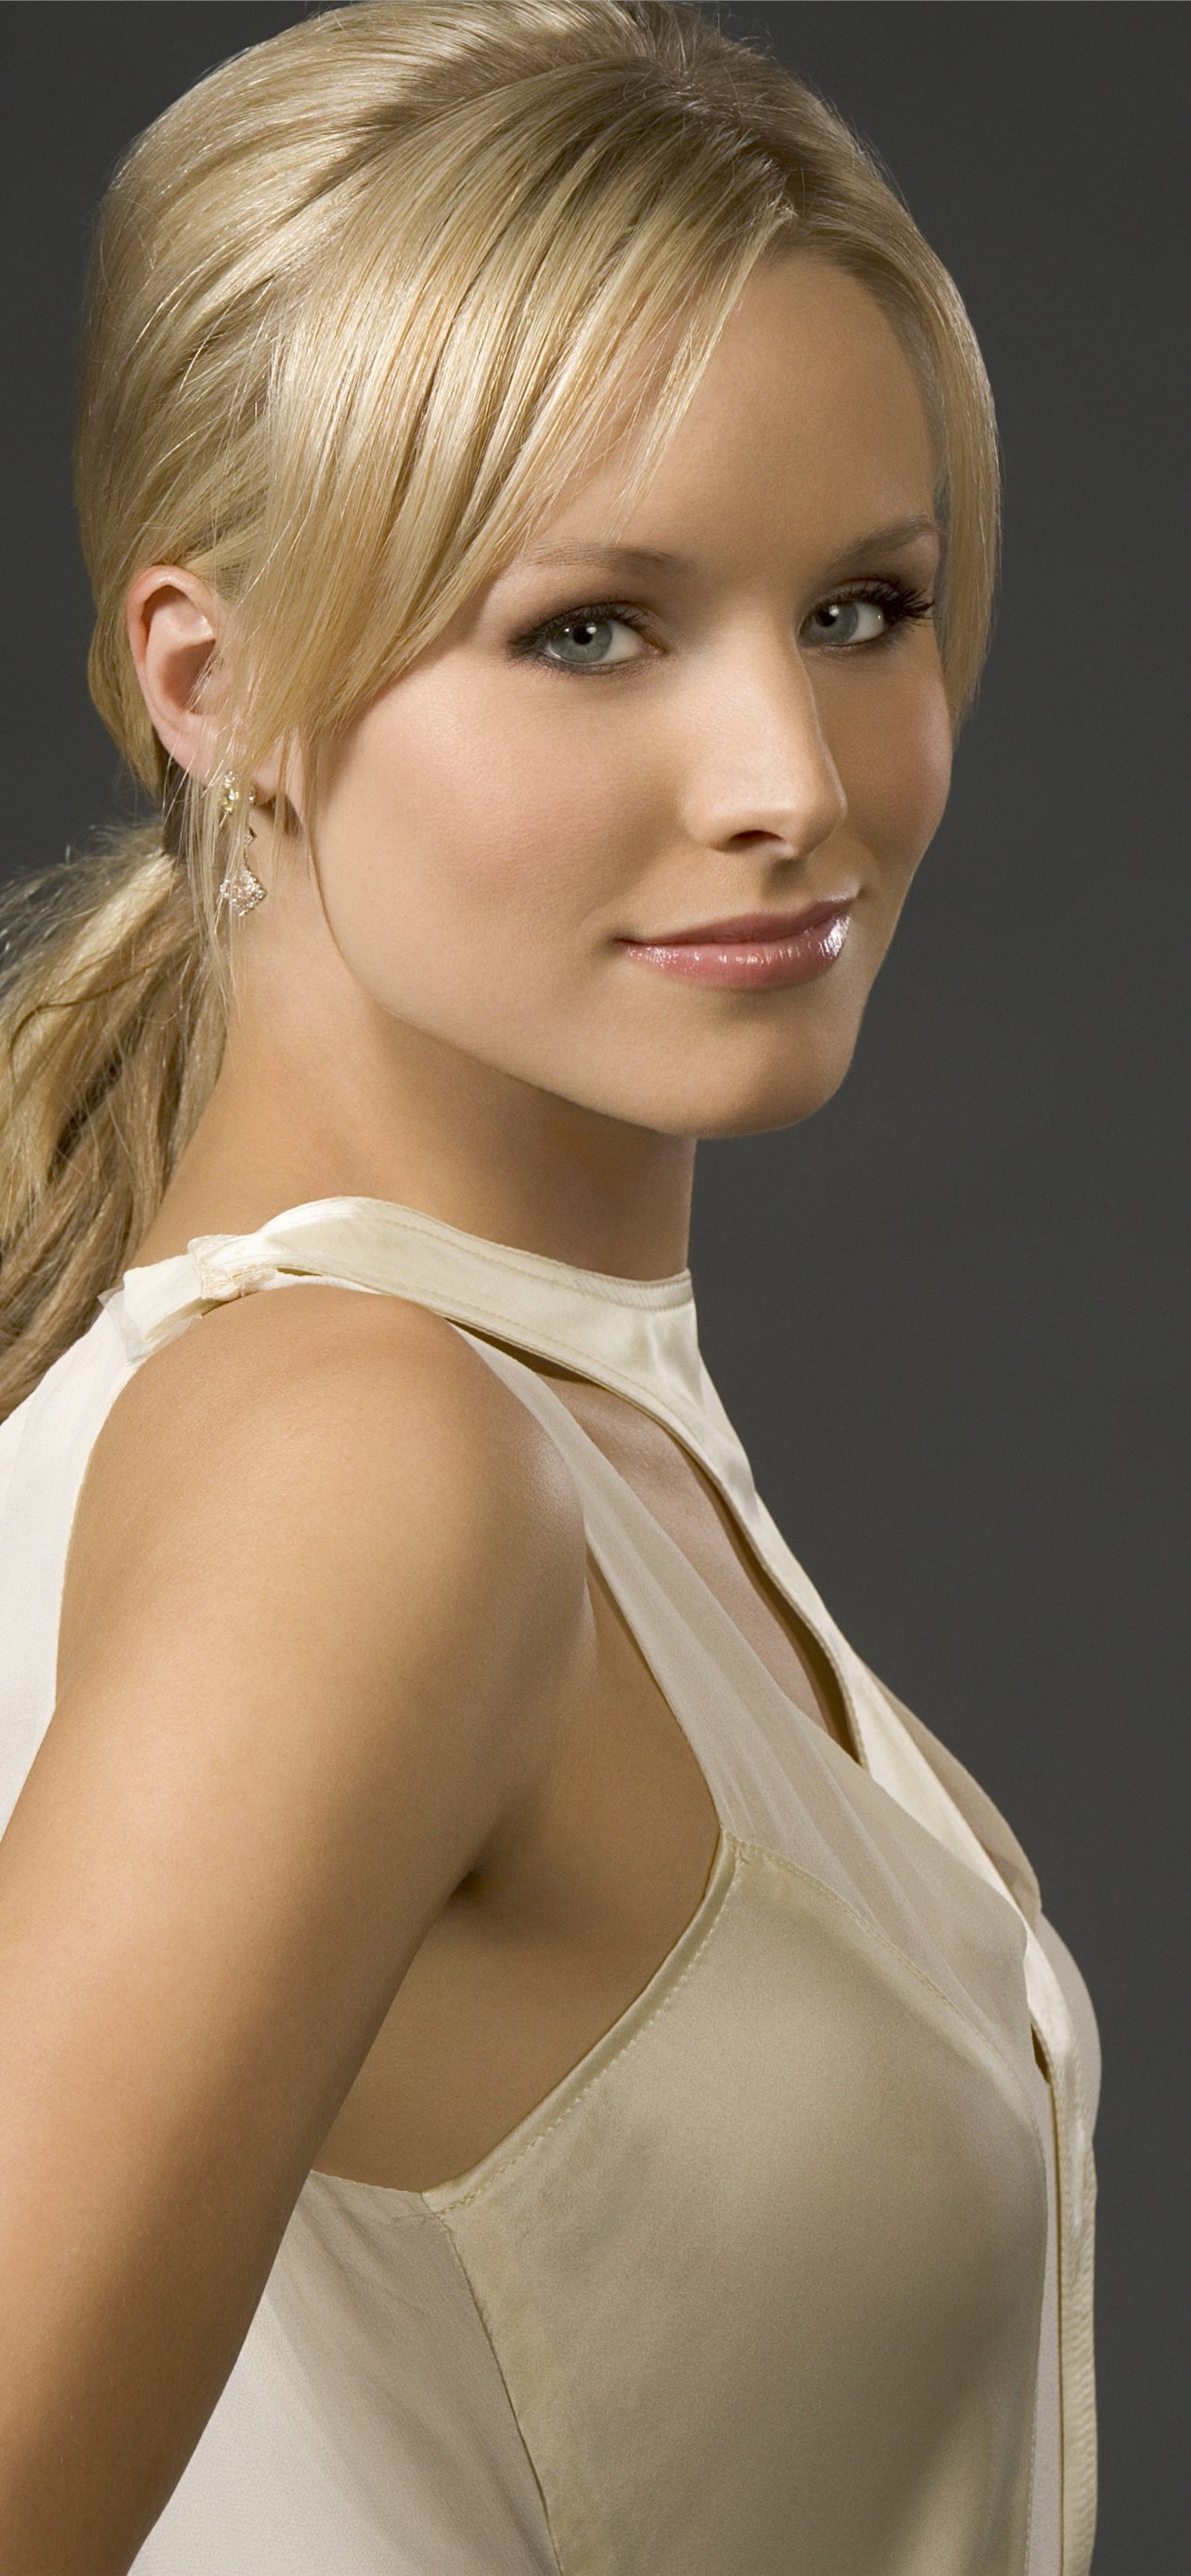 Kristen Bell, iPhone wallpapers, Download free, Hollywood, 1290x2780 HD Handy